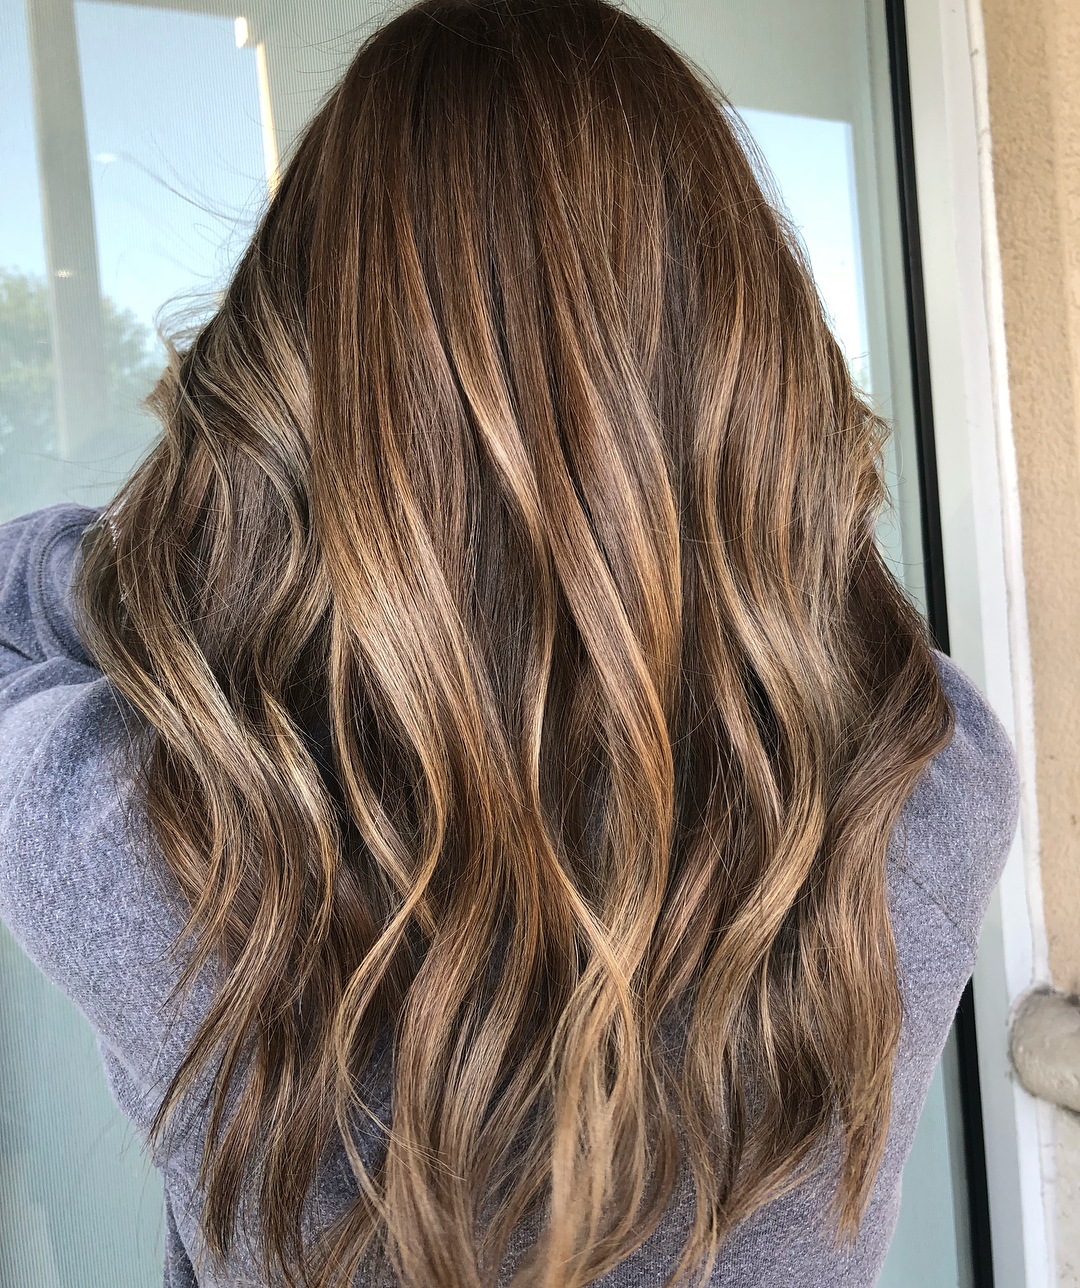 Brown Hair With Warm-Toned Shiny Highlights